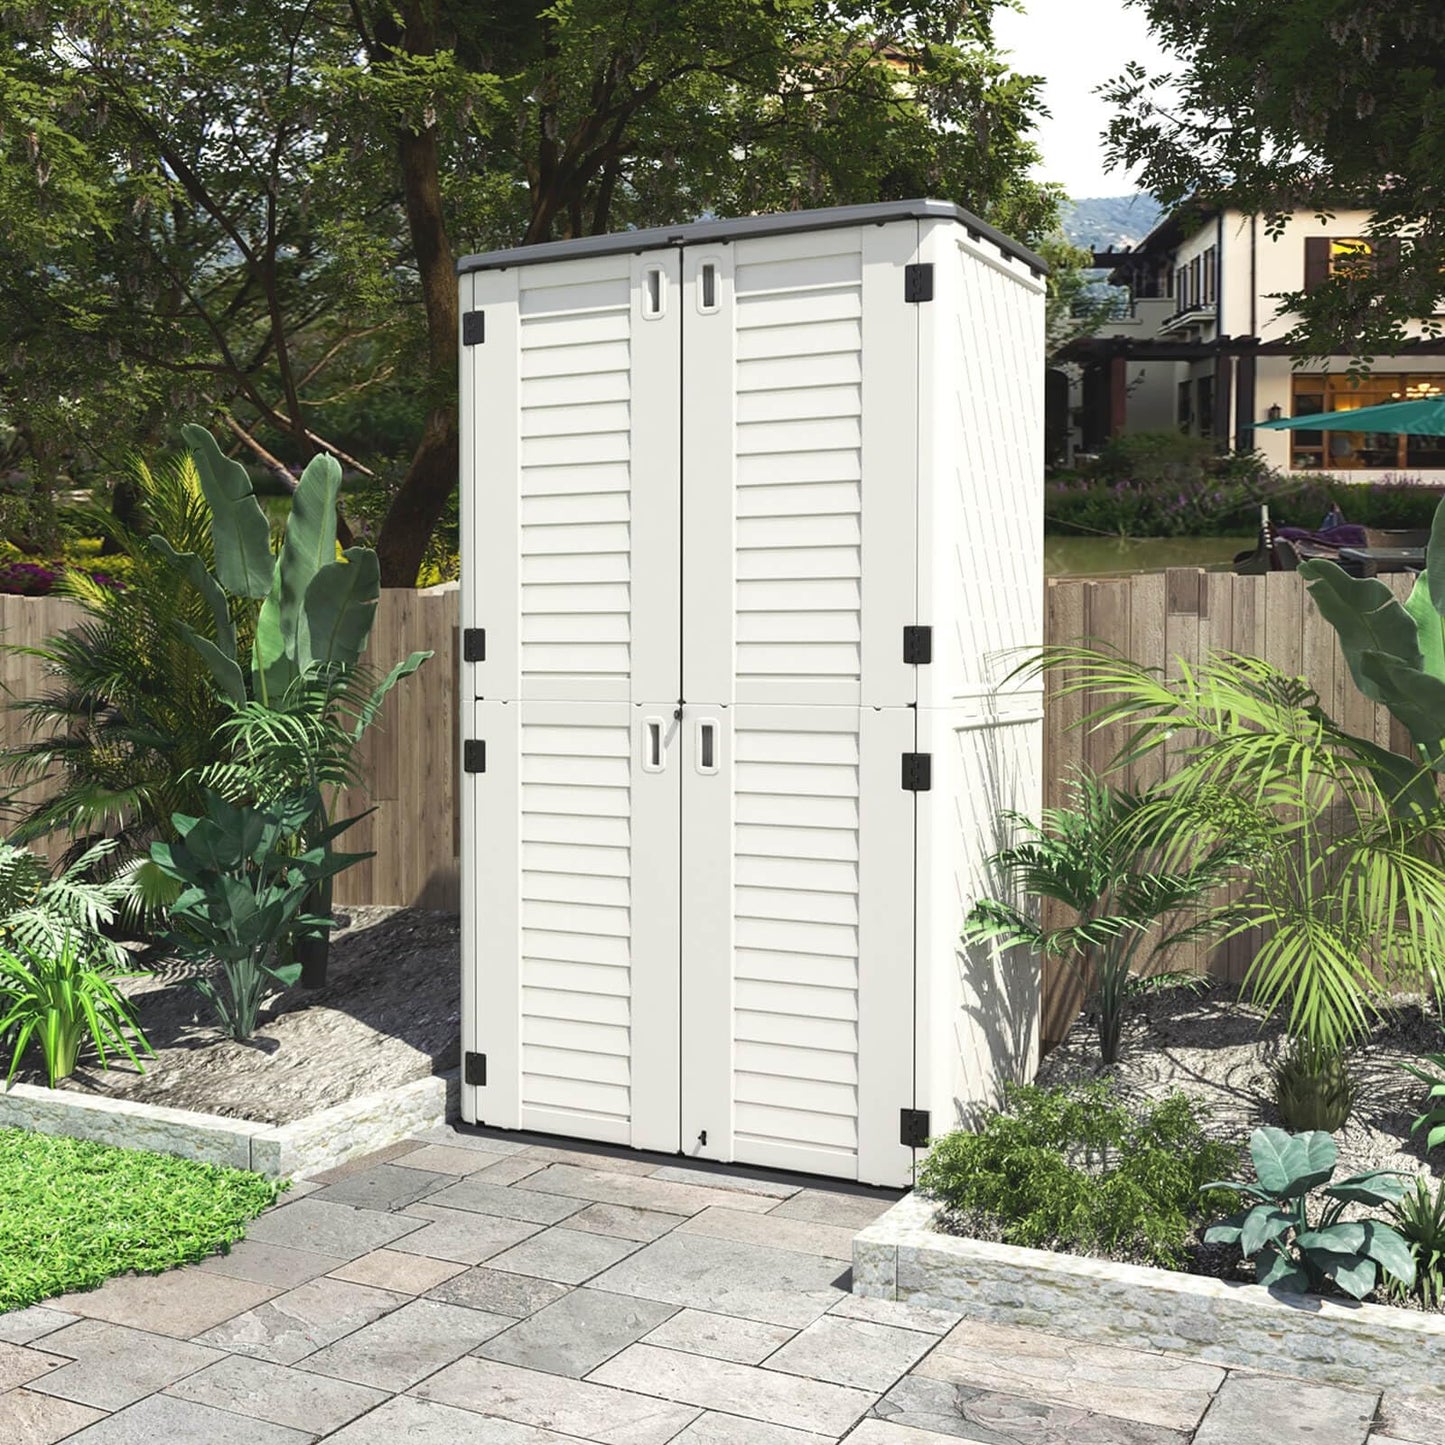 HOMSPARK Vertical Storage Shed Weather Resistance, Double-Layer Outdoor Storage Cabinet Multi-Purpose for Backyards and Patios Accessories, (50 in. L x 29 in. W x 82 in. H, 52 Cubic Feet) Grey roof,Cream white wall,Black floor